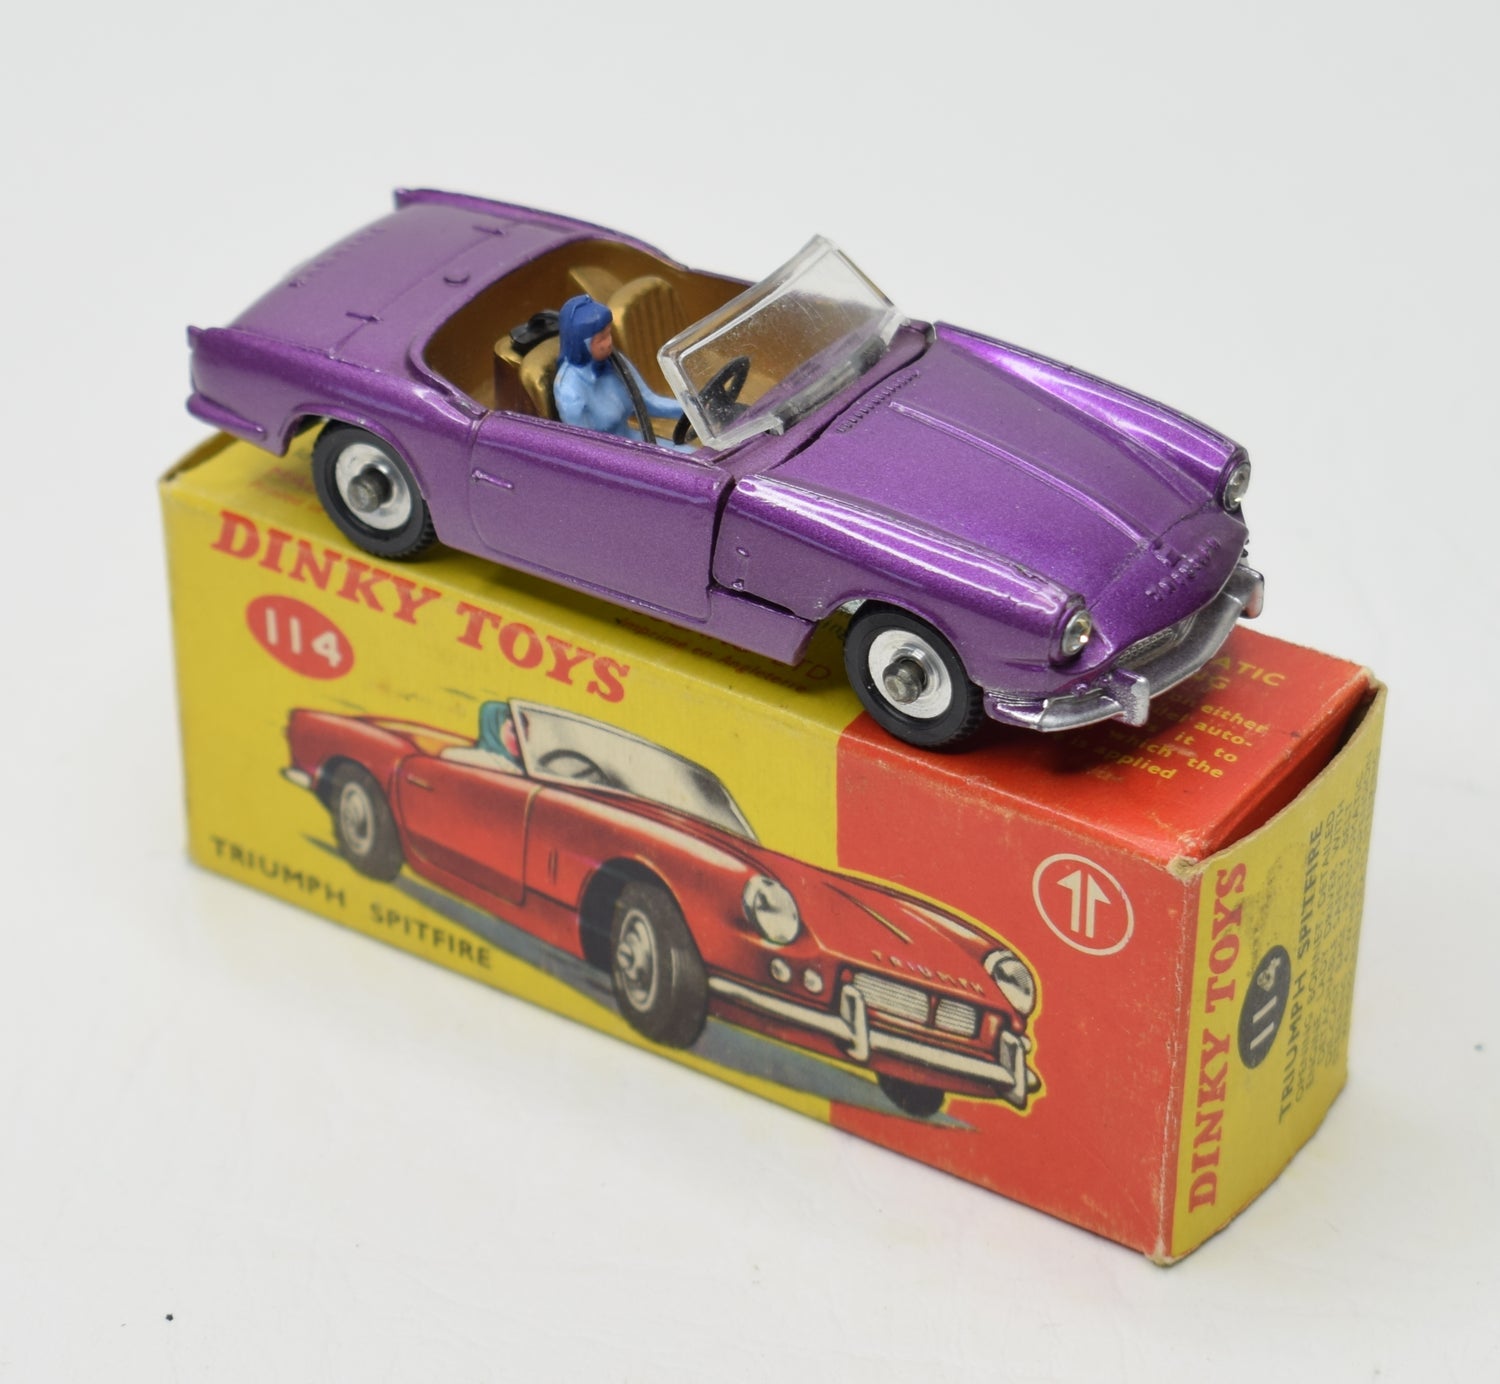 Dinky toy 114 Triumph Spitfire Very Near Mint/Boxed 'Cotswold' Collection Part 2